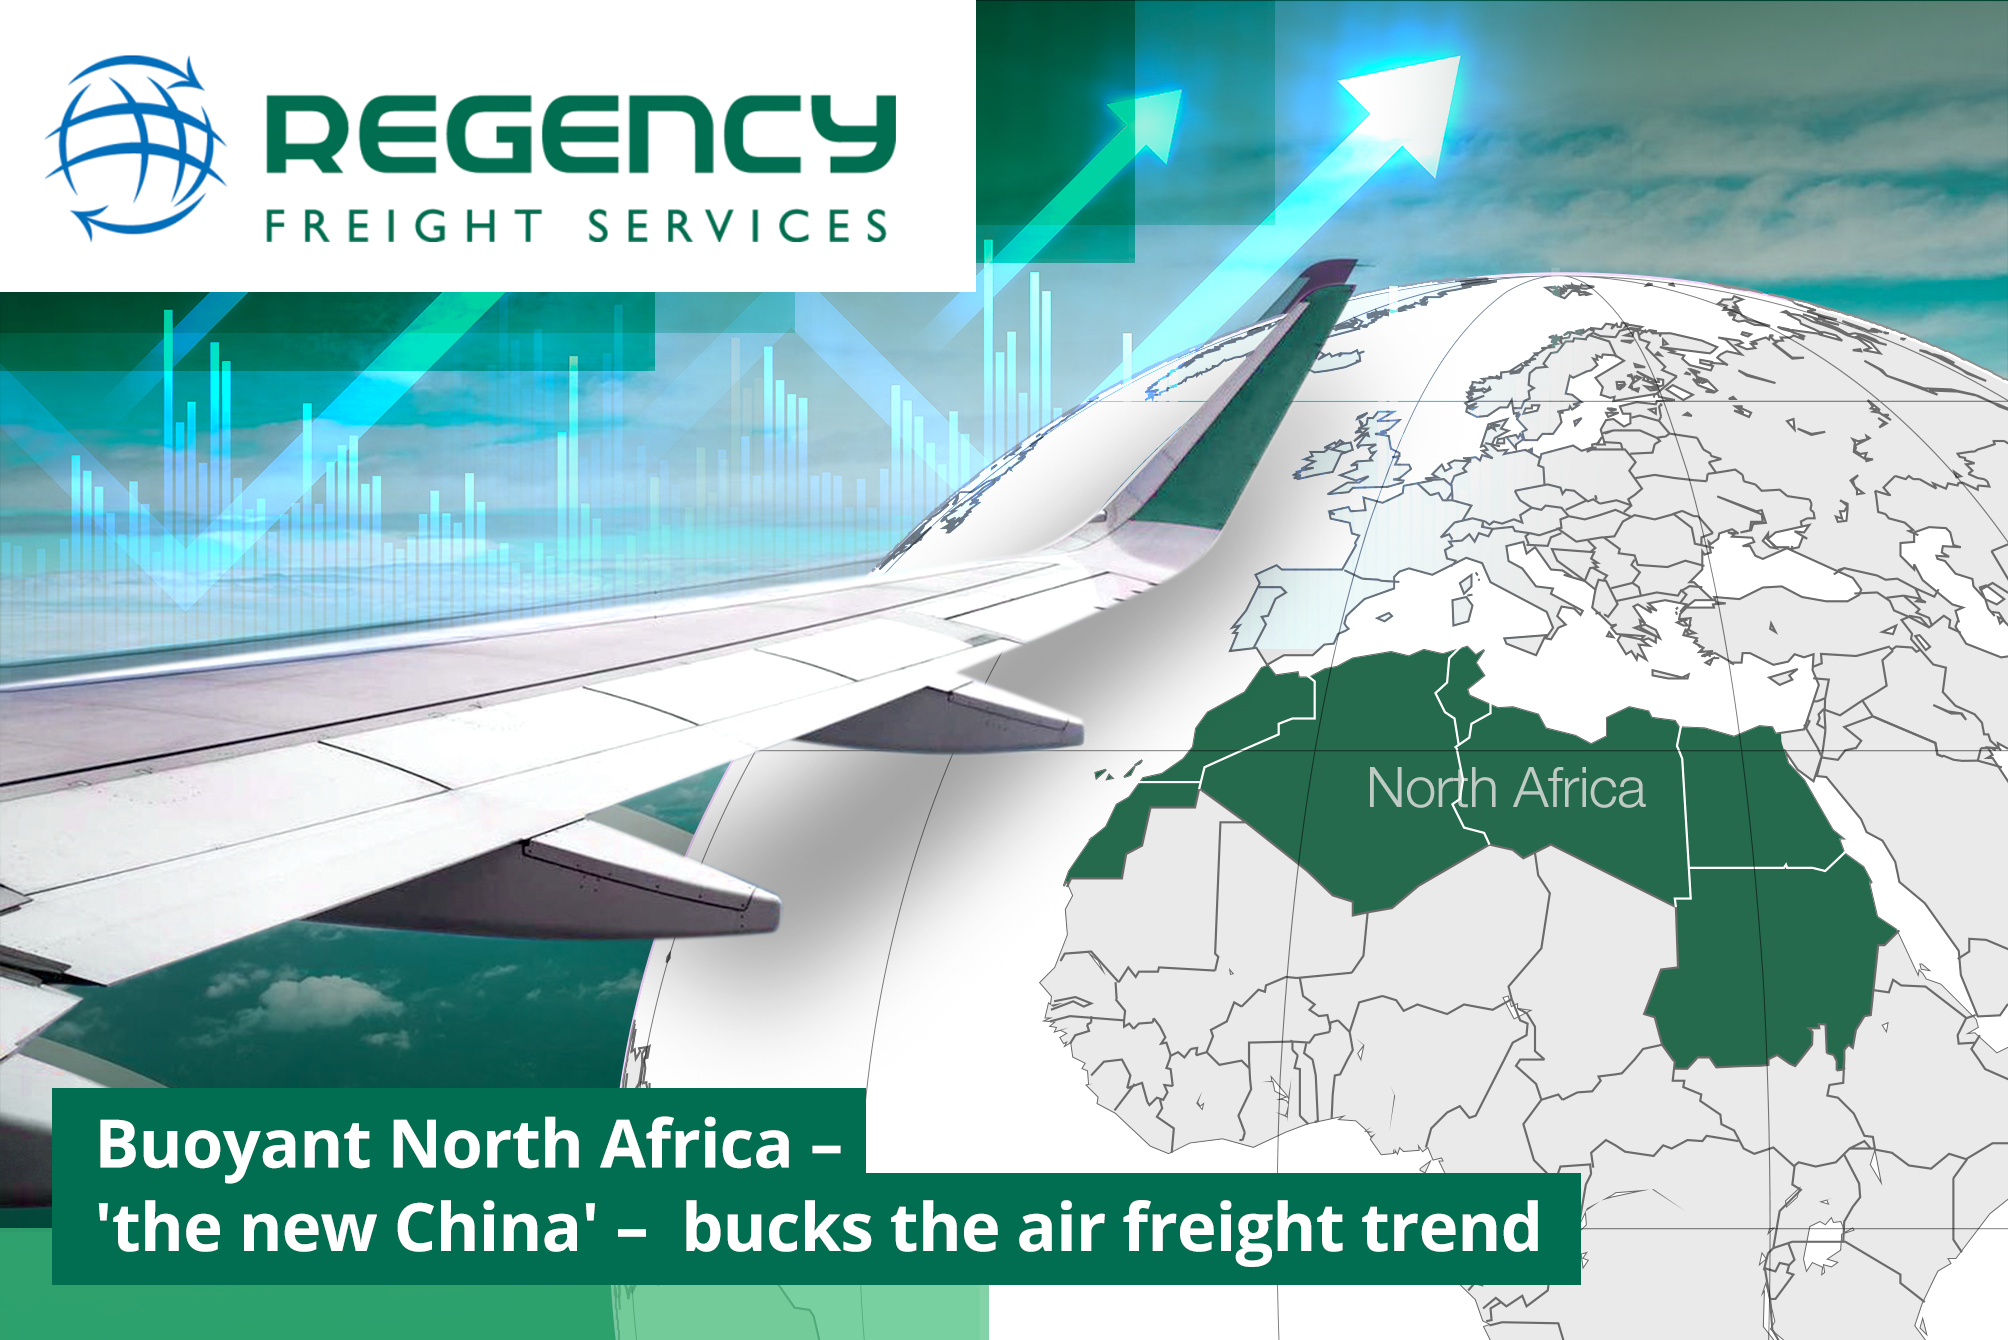 Buoyant North Africa – 'the new China' – bucks the air freight trend